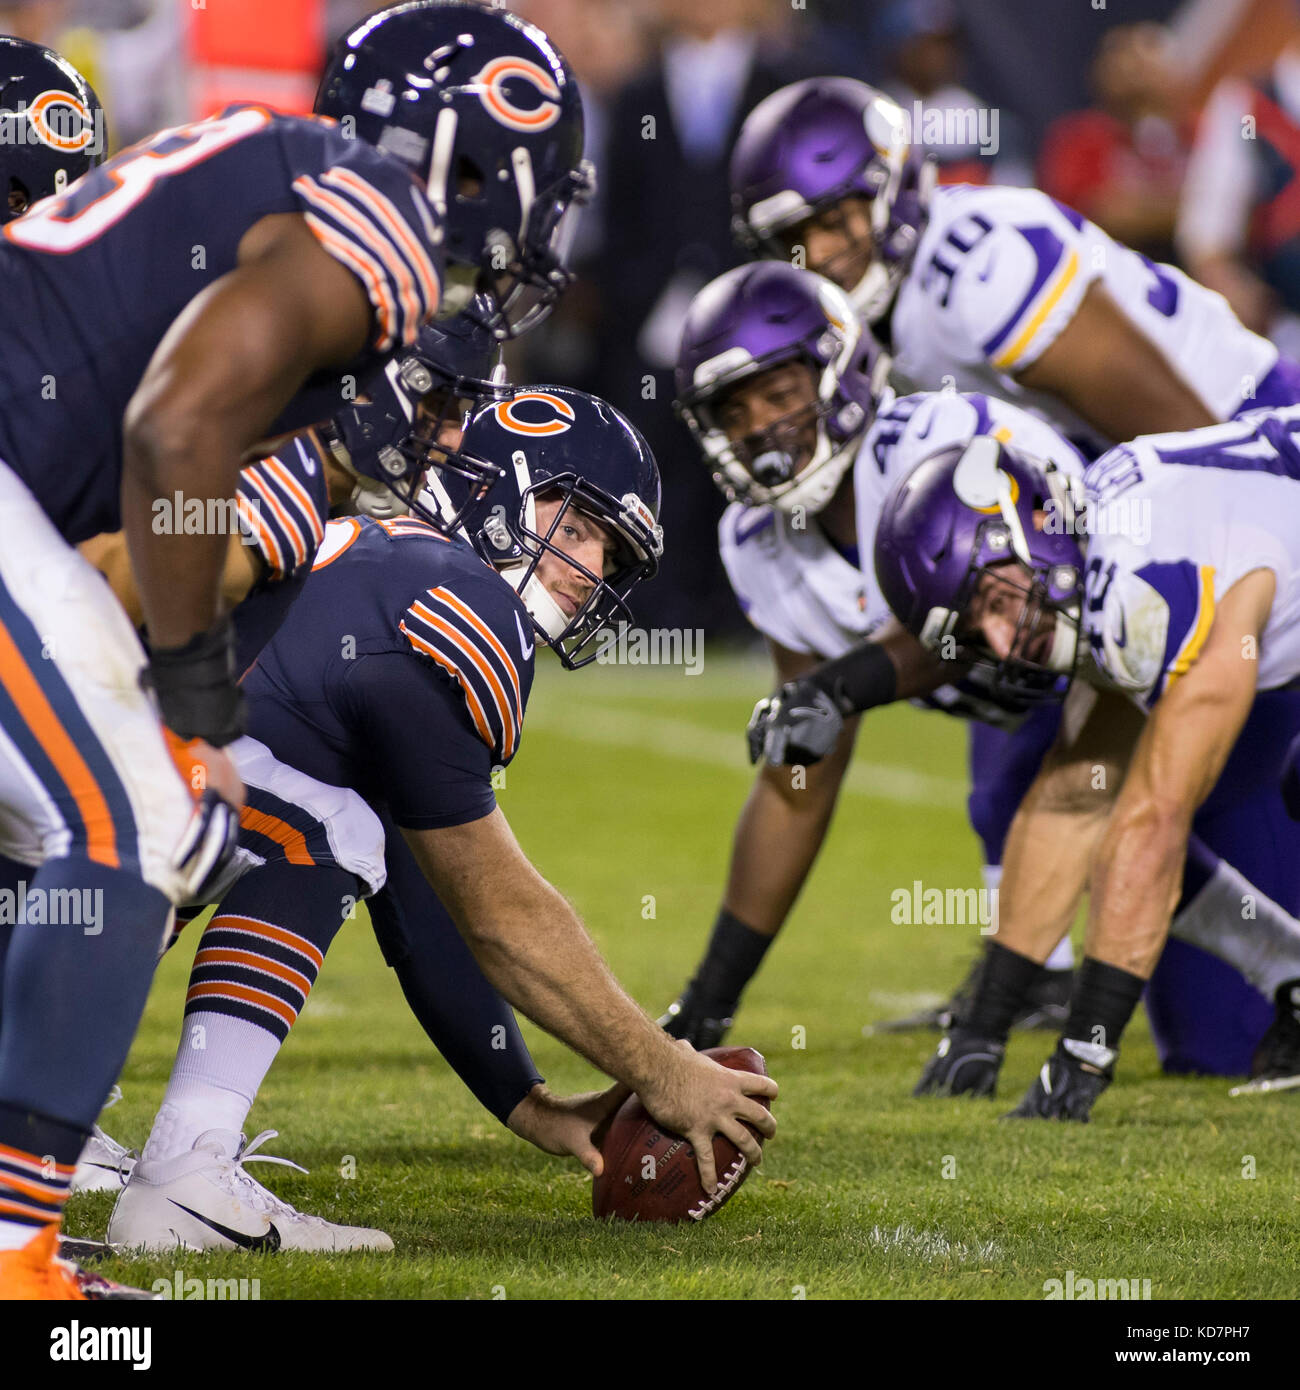 Chicago, Illinois, USA. 09th Oct, 2017. - Bears #49 Andrew DePaola readies to snap the ball during the NFL Game between the Minnesota Vikings and Chicago Bears at Soldier Field in Chicago, IL. Photographer: Mike Wulf Credit: csm/Alamy Live News Stock Photo